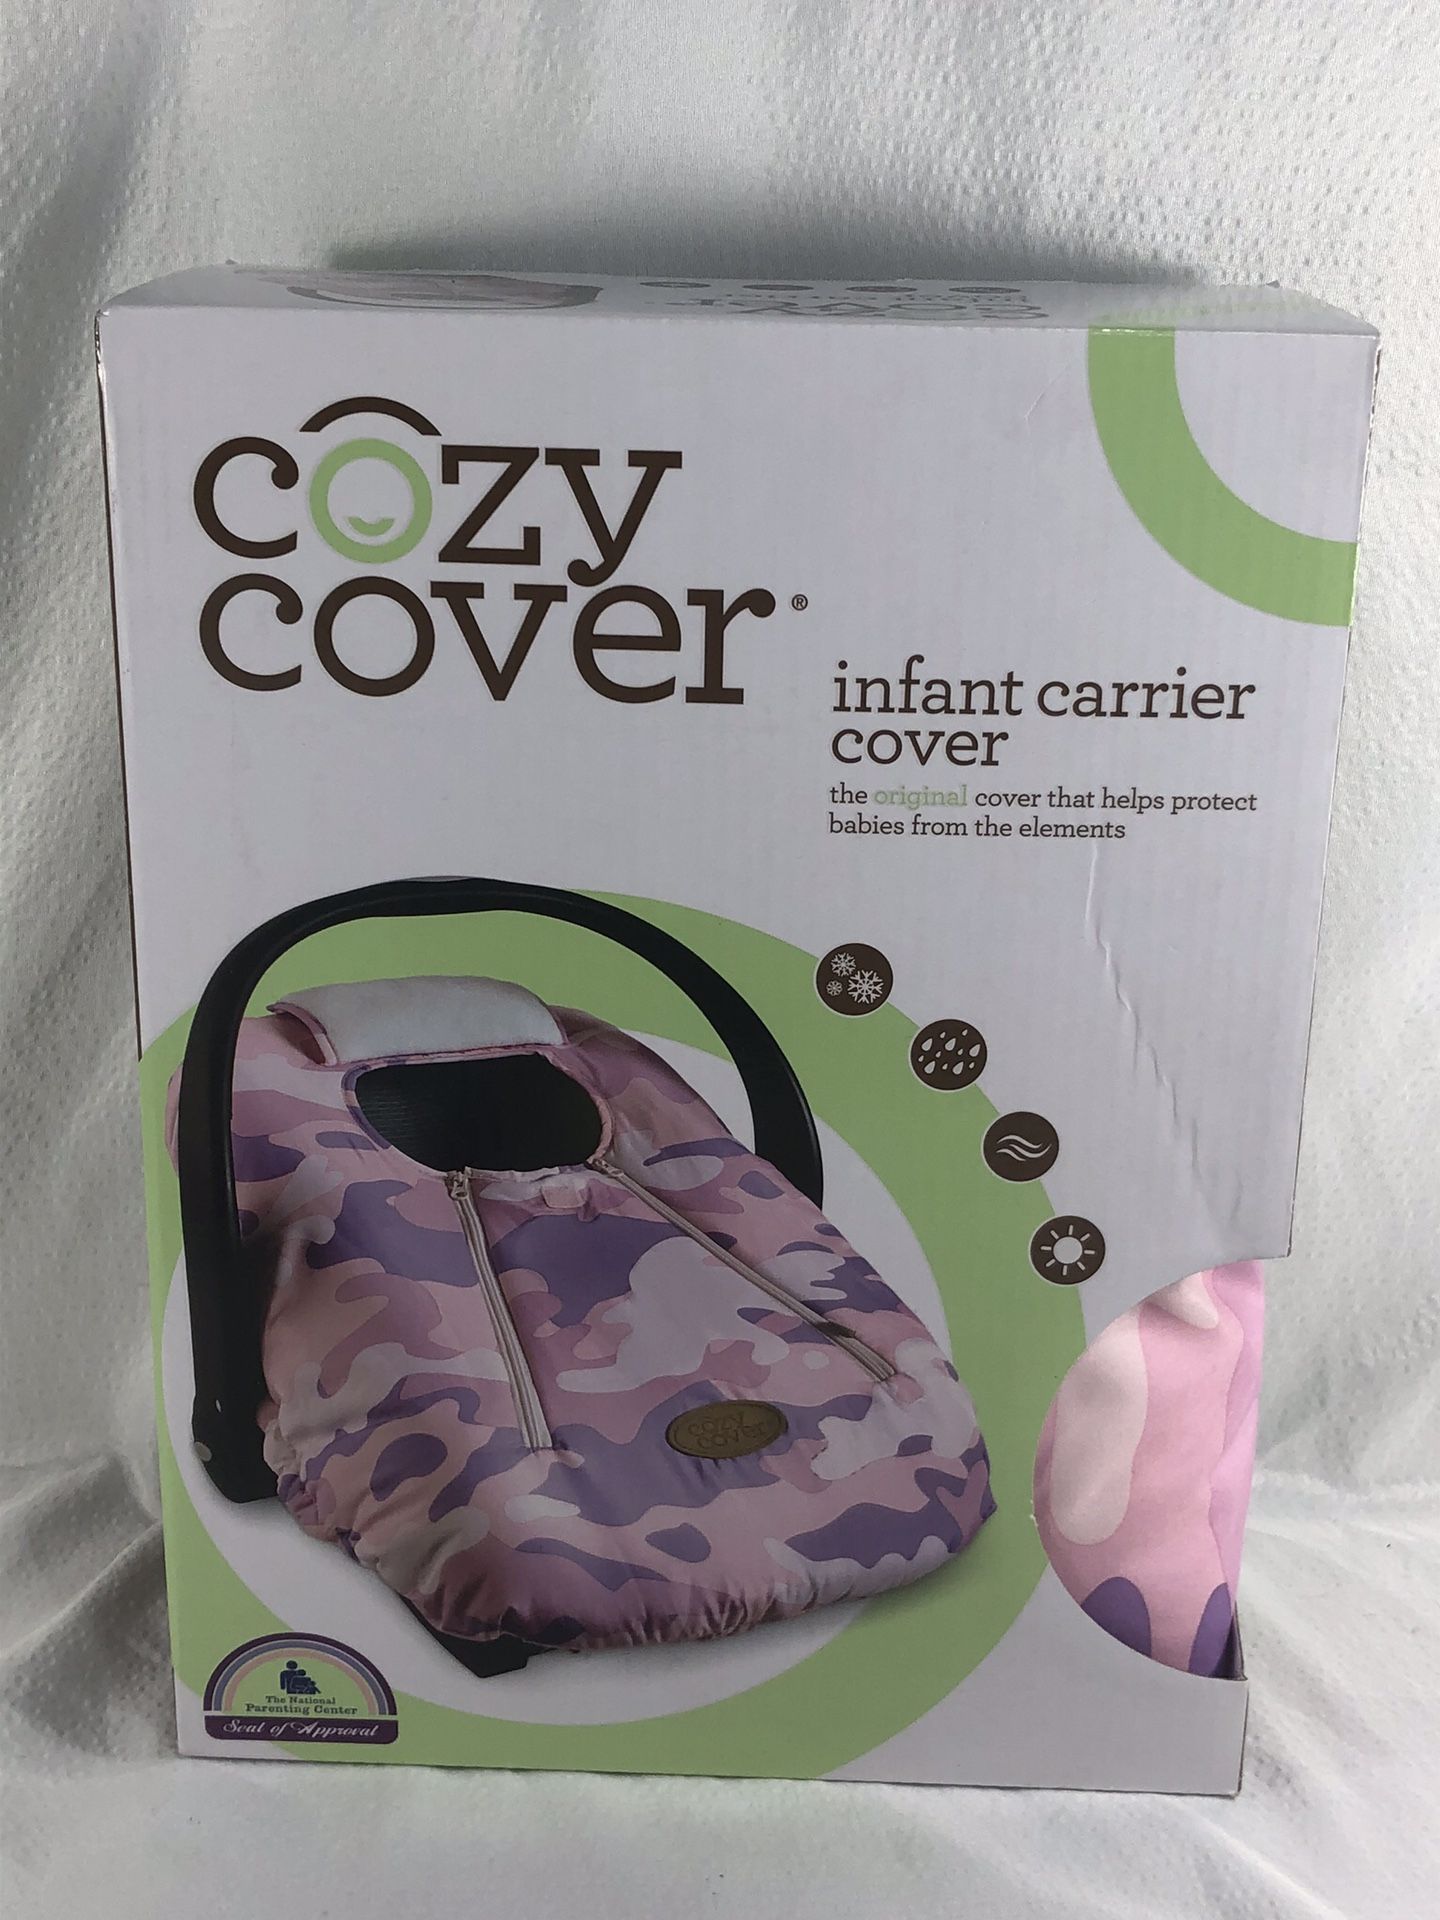 Pink and Lavender Camouflage New in Box Cozy Cover Infant Carrier Cover